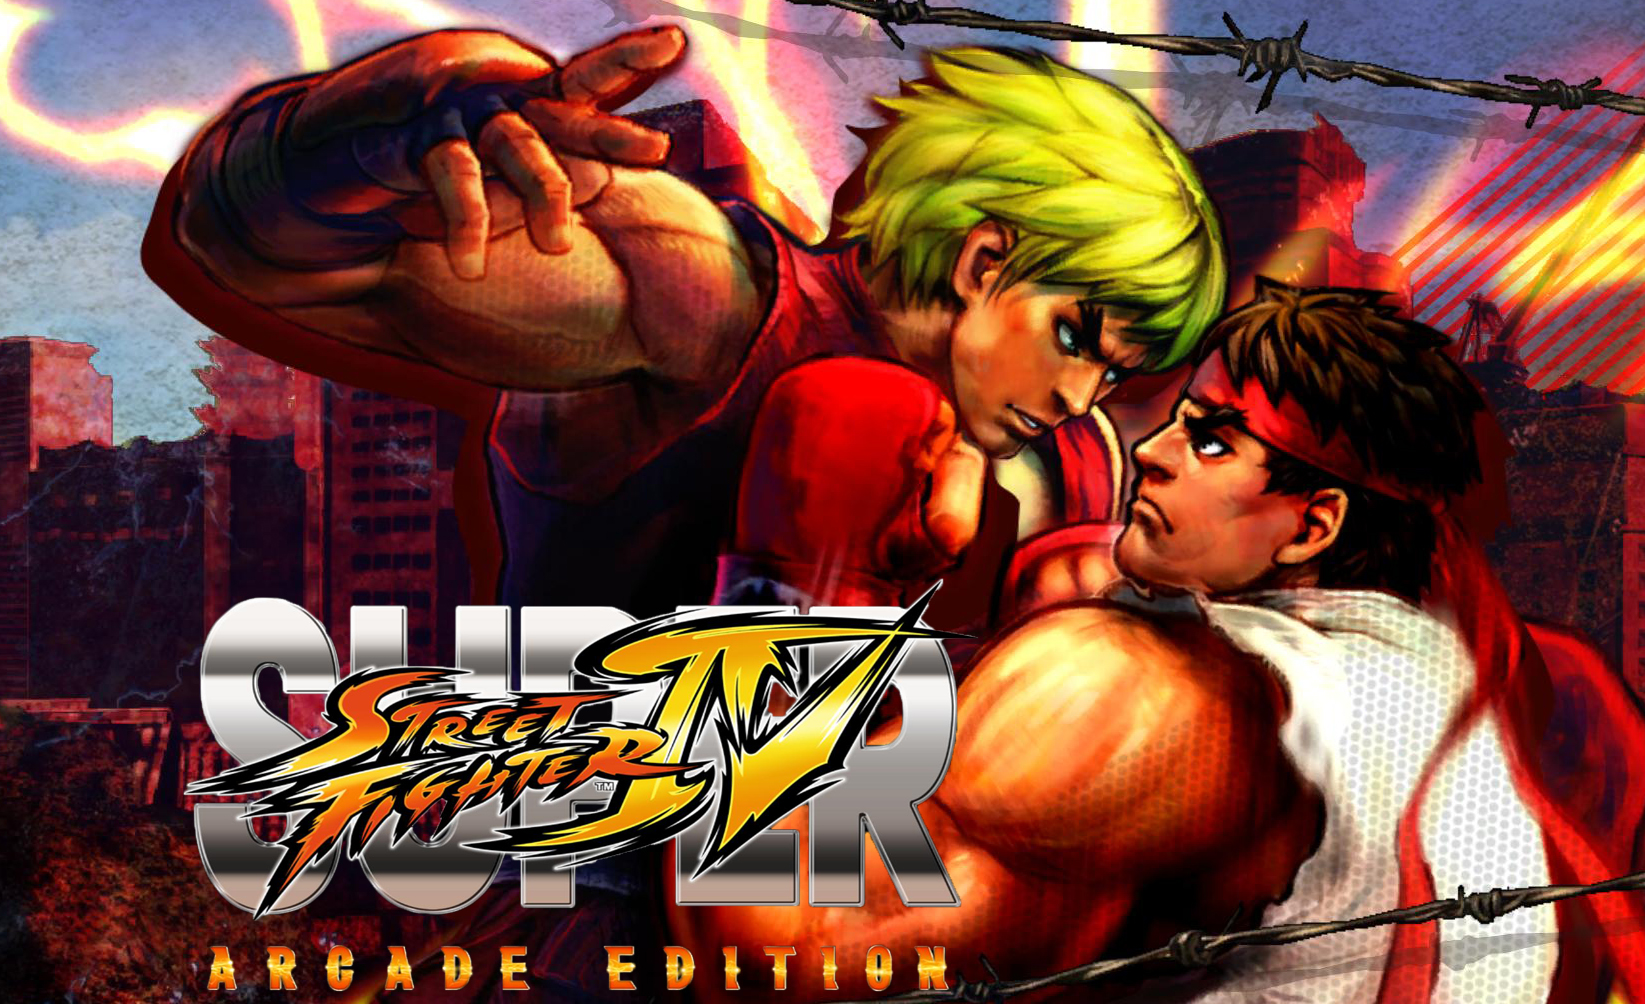 HQ Super Street Fighter IV: Arcade Edition Wallpapers | File 1217.31Kb